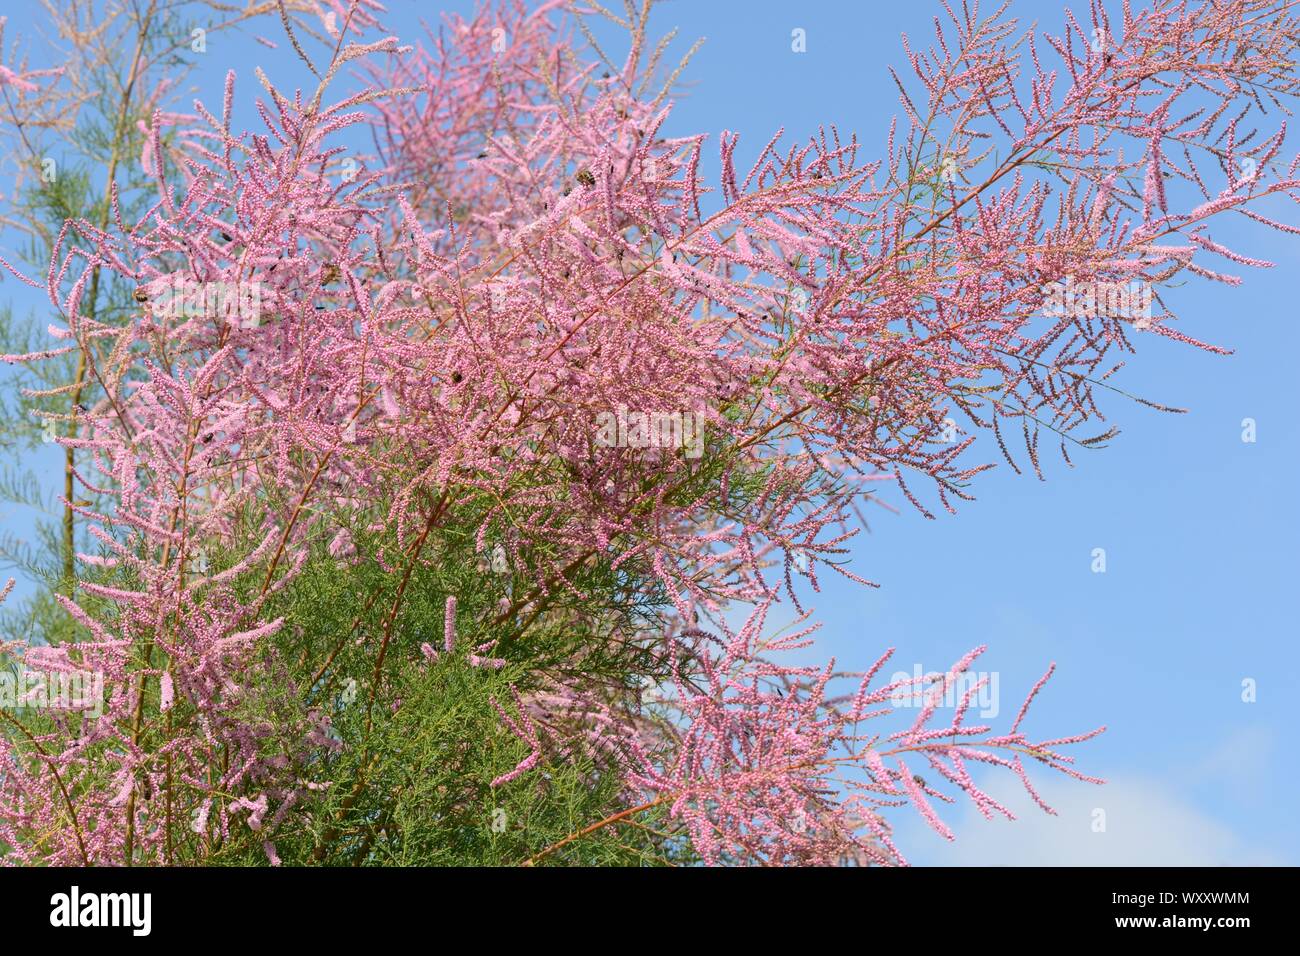 Tamarix ramosissima Pink Cascade feathery plumes of tiny pink flowers on arching branches Stock Photo